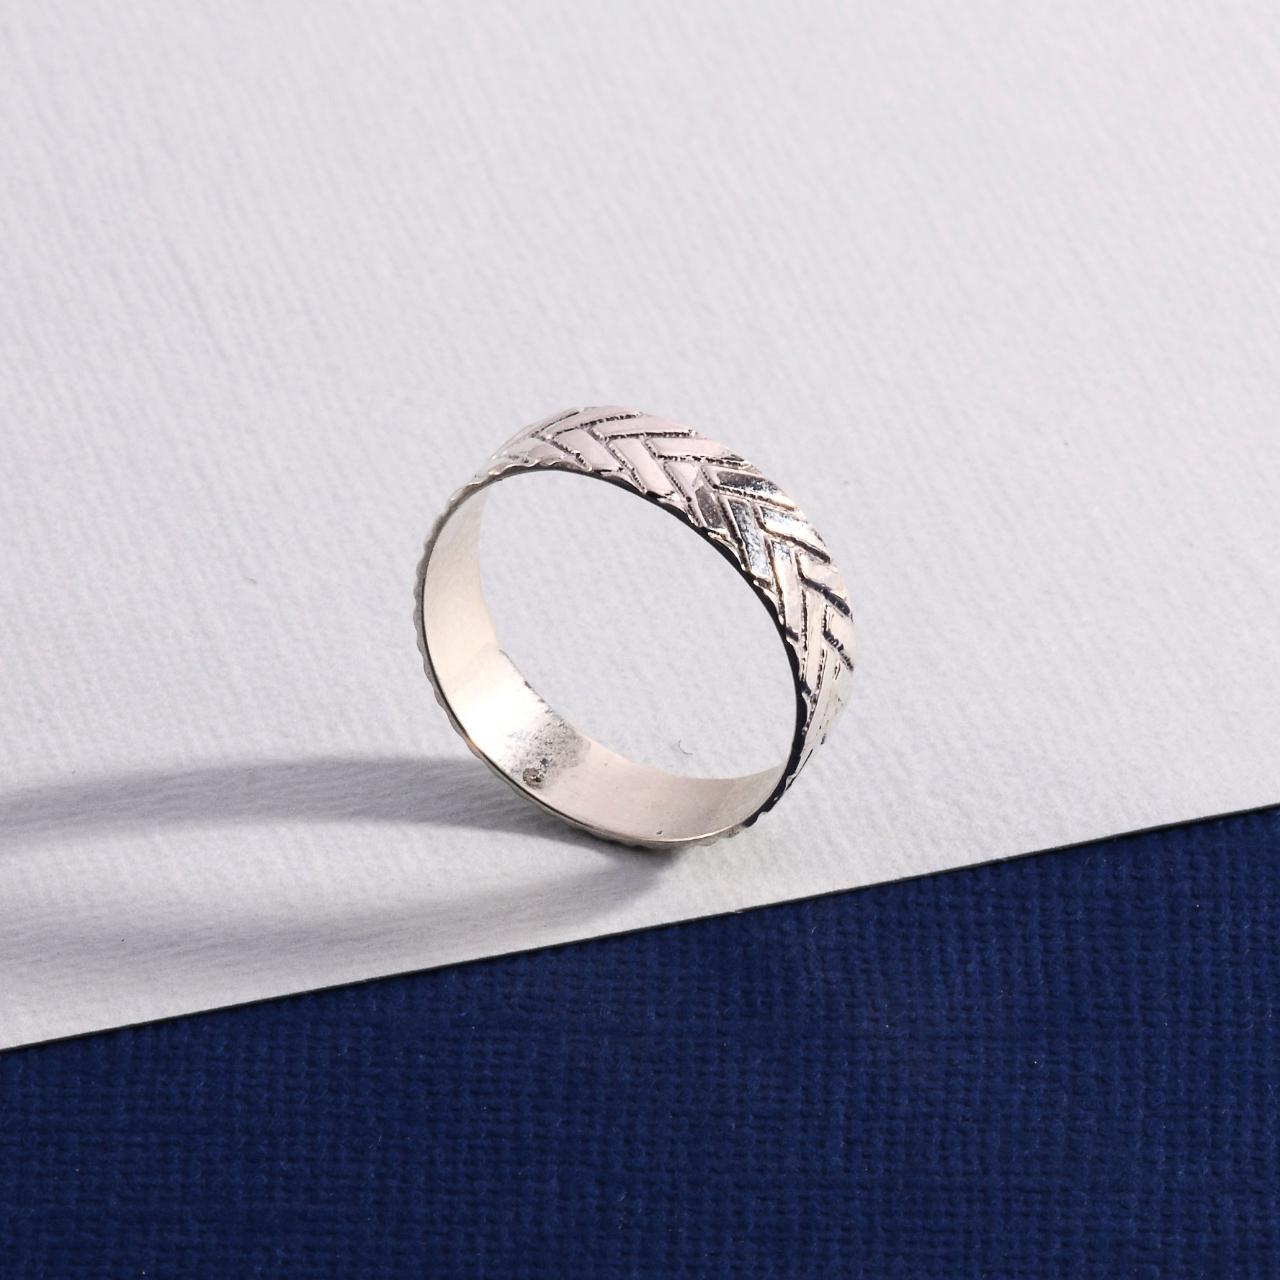 Product Image 2 - Sterling Silver Ring

Size 9

925 Symbol